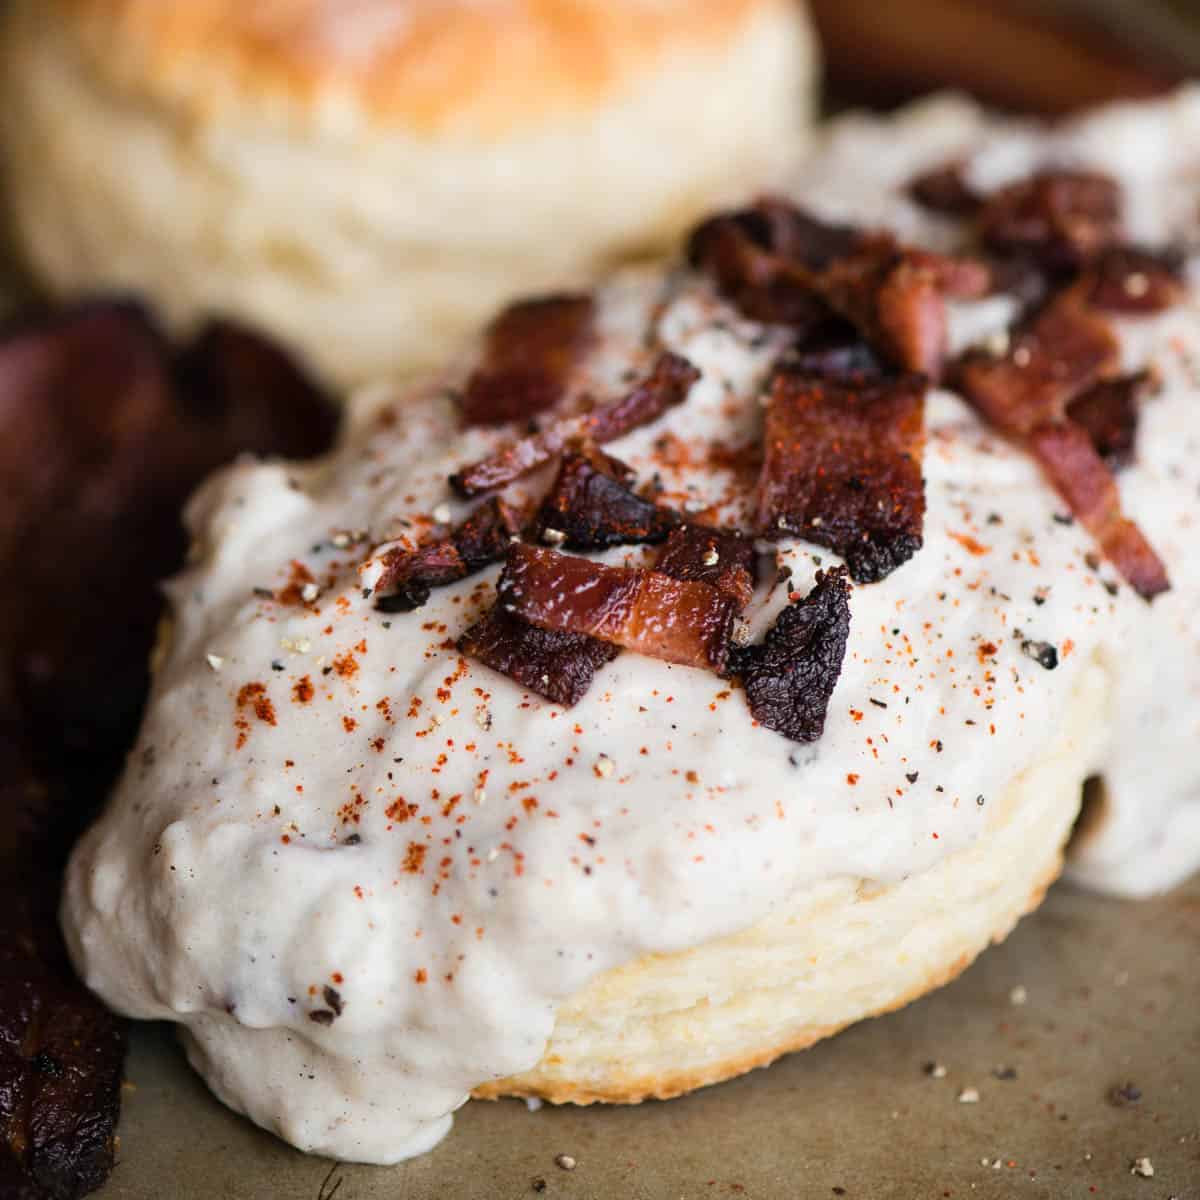 https://selfproclaimedfoodie.com/wp-content/uploads/country-bacon-gravy-square-1.jpg